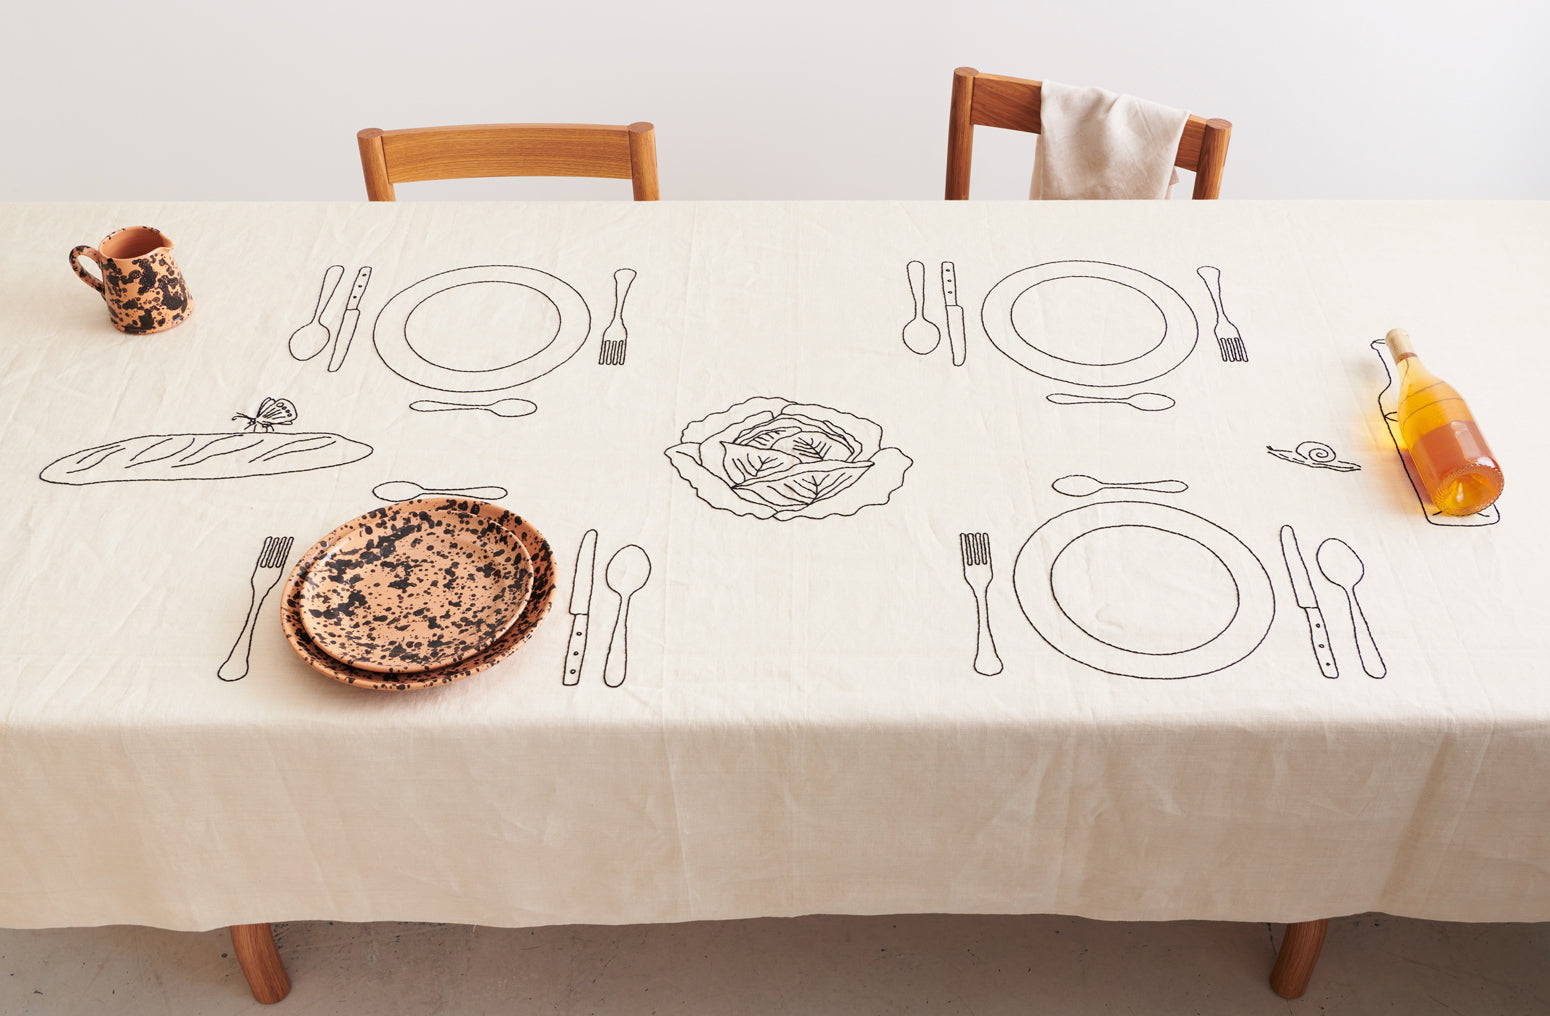 Fruitful Embroidered Dining Table Linens